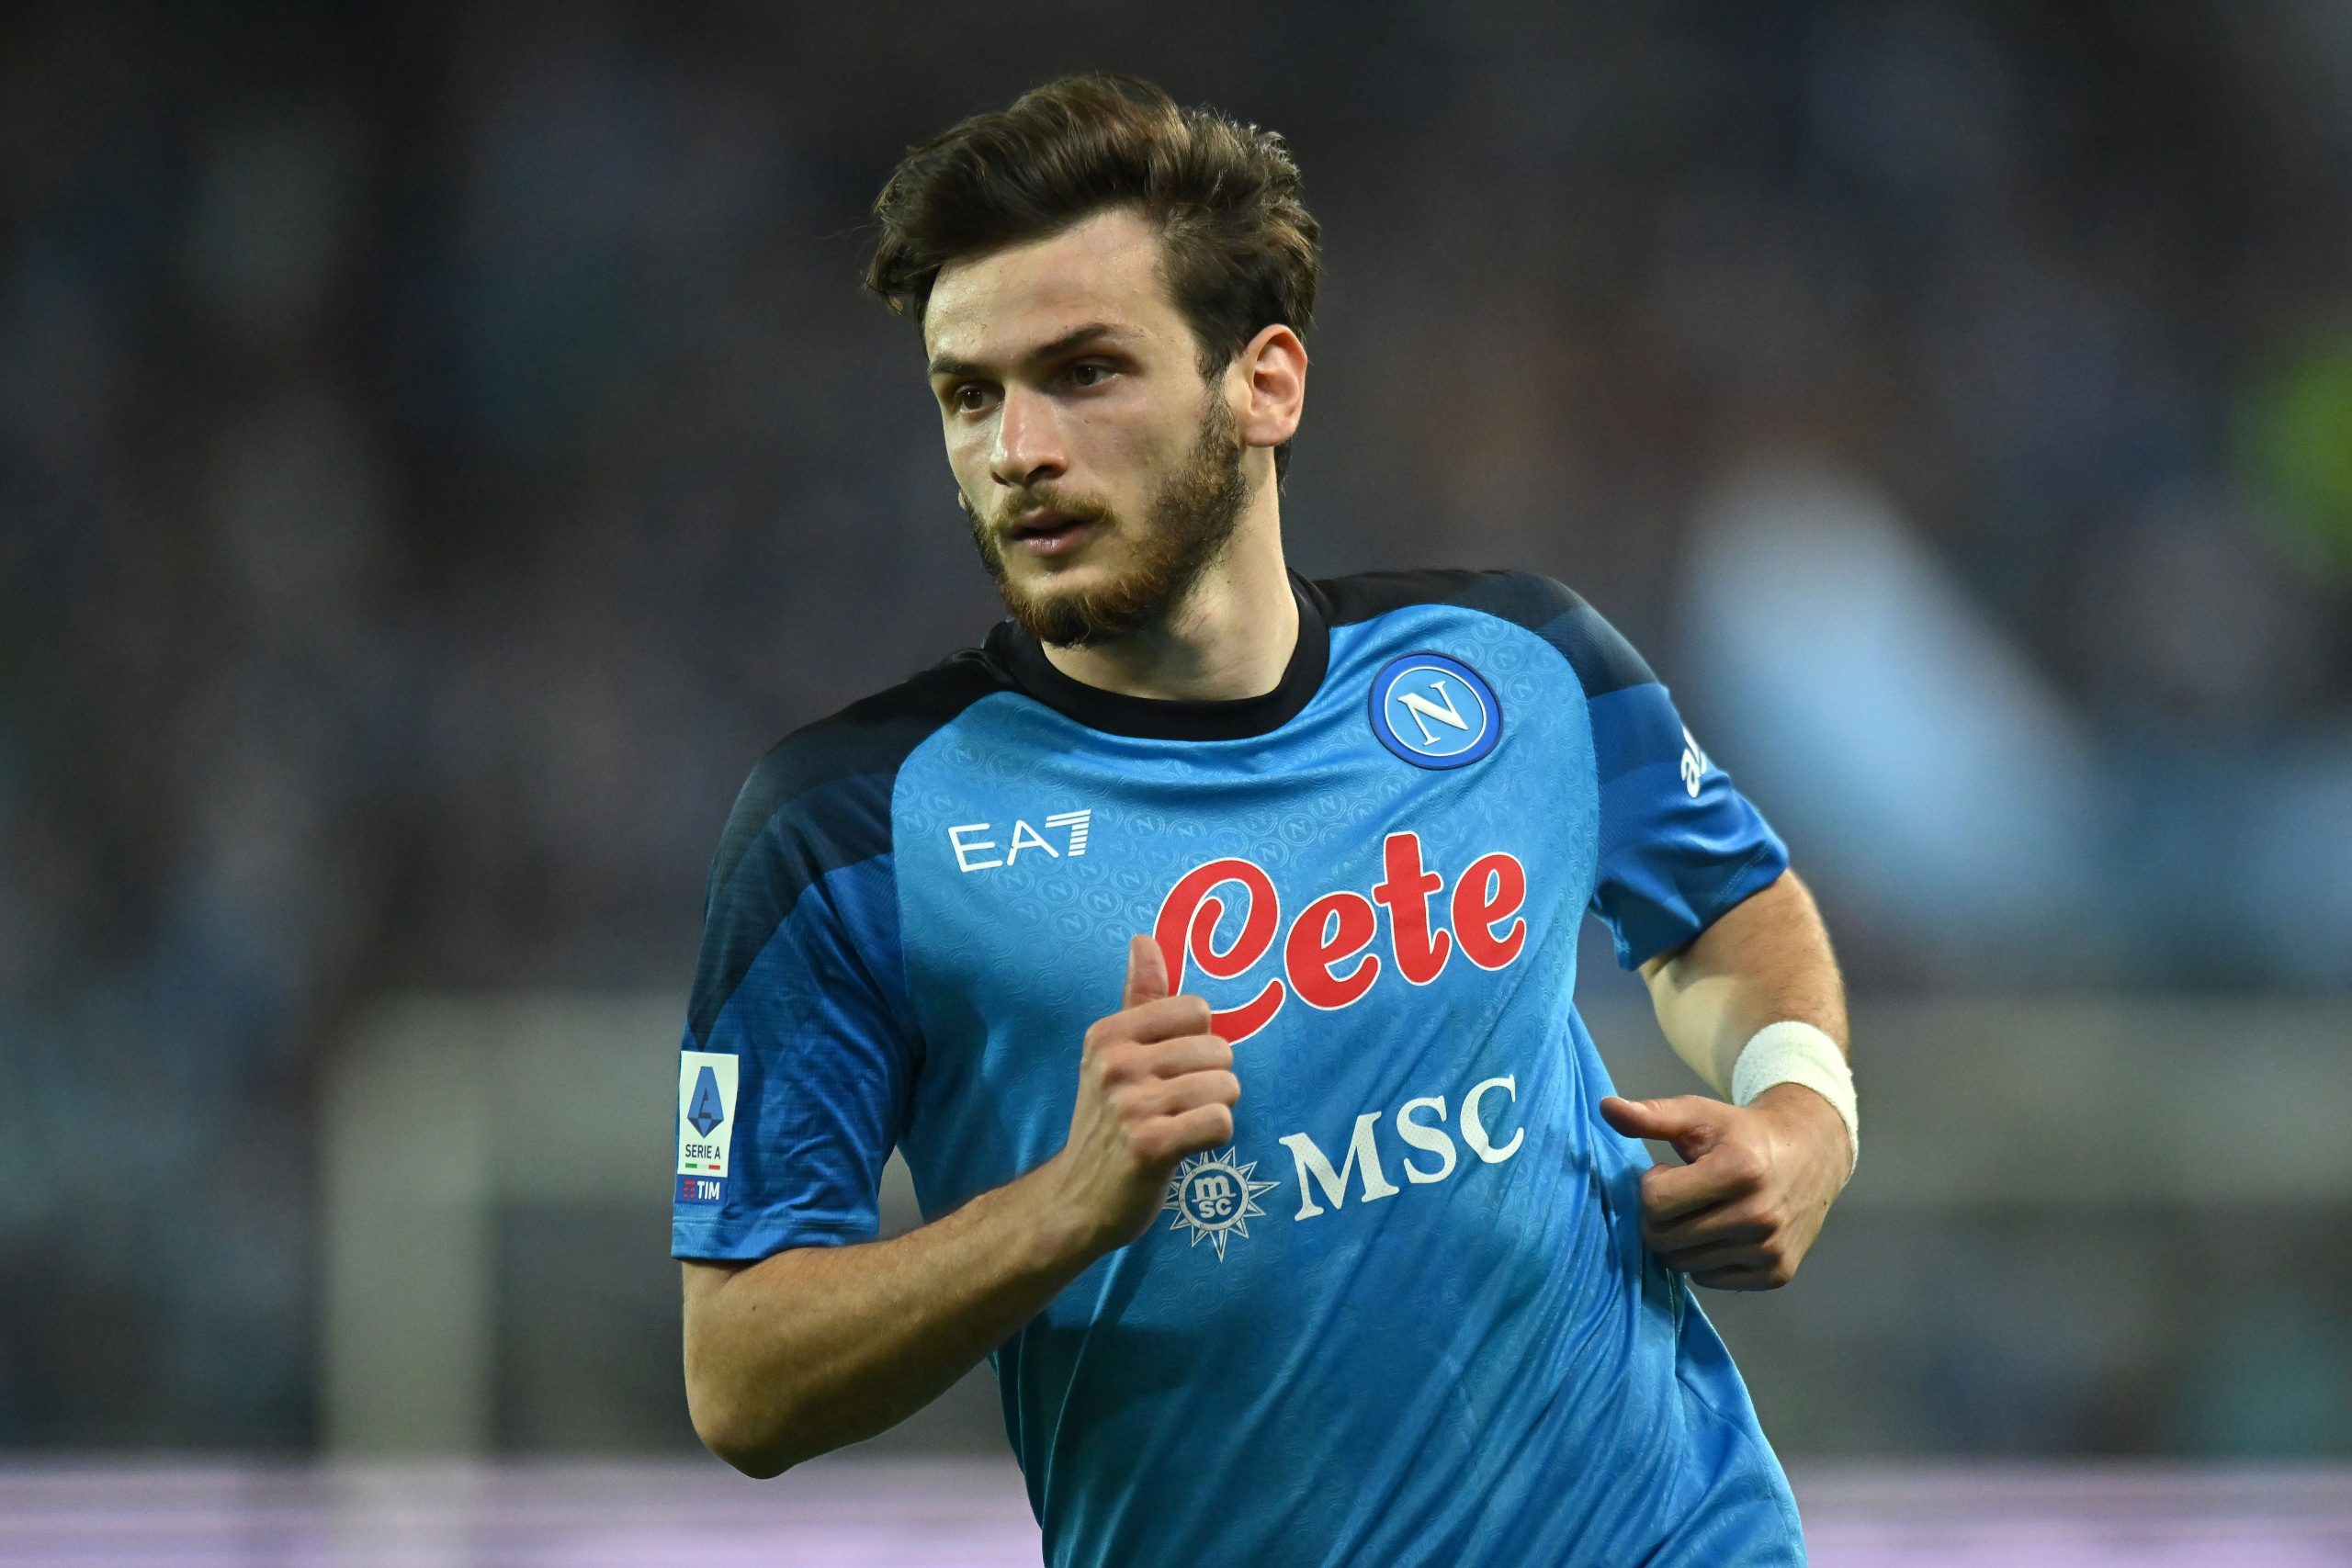 Chelsea have made an enquiry and will consider making a bid for Napoli winger Khvicha Kvaratskhelia.